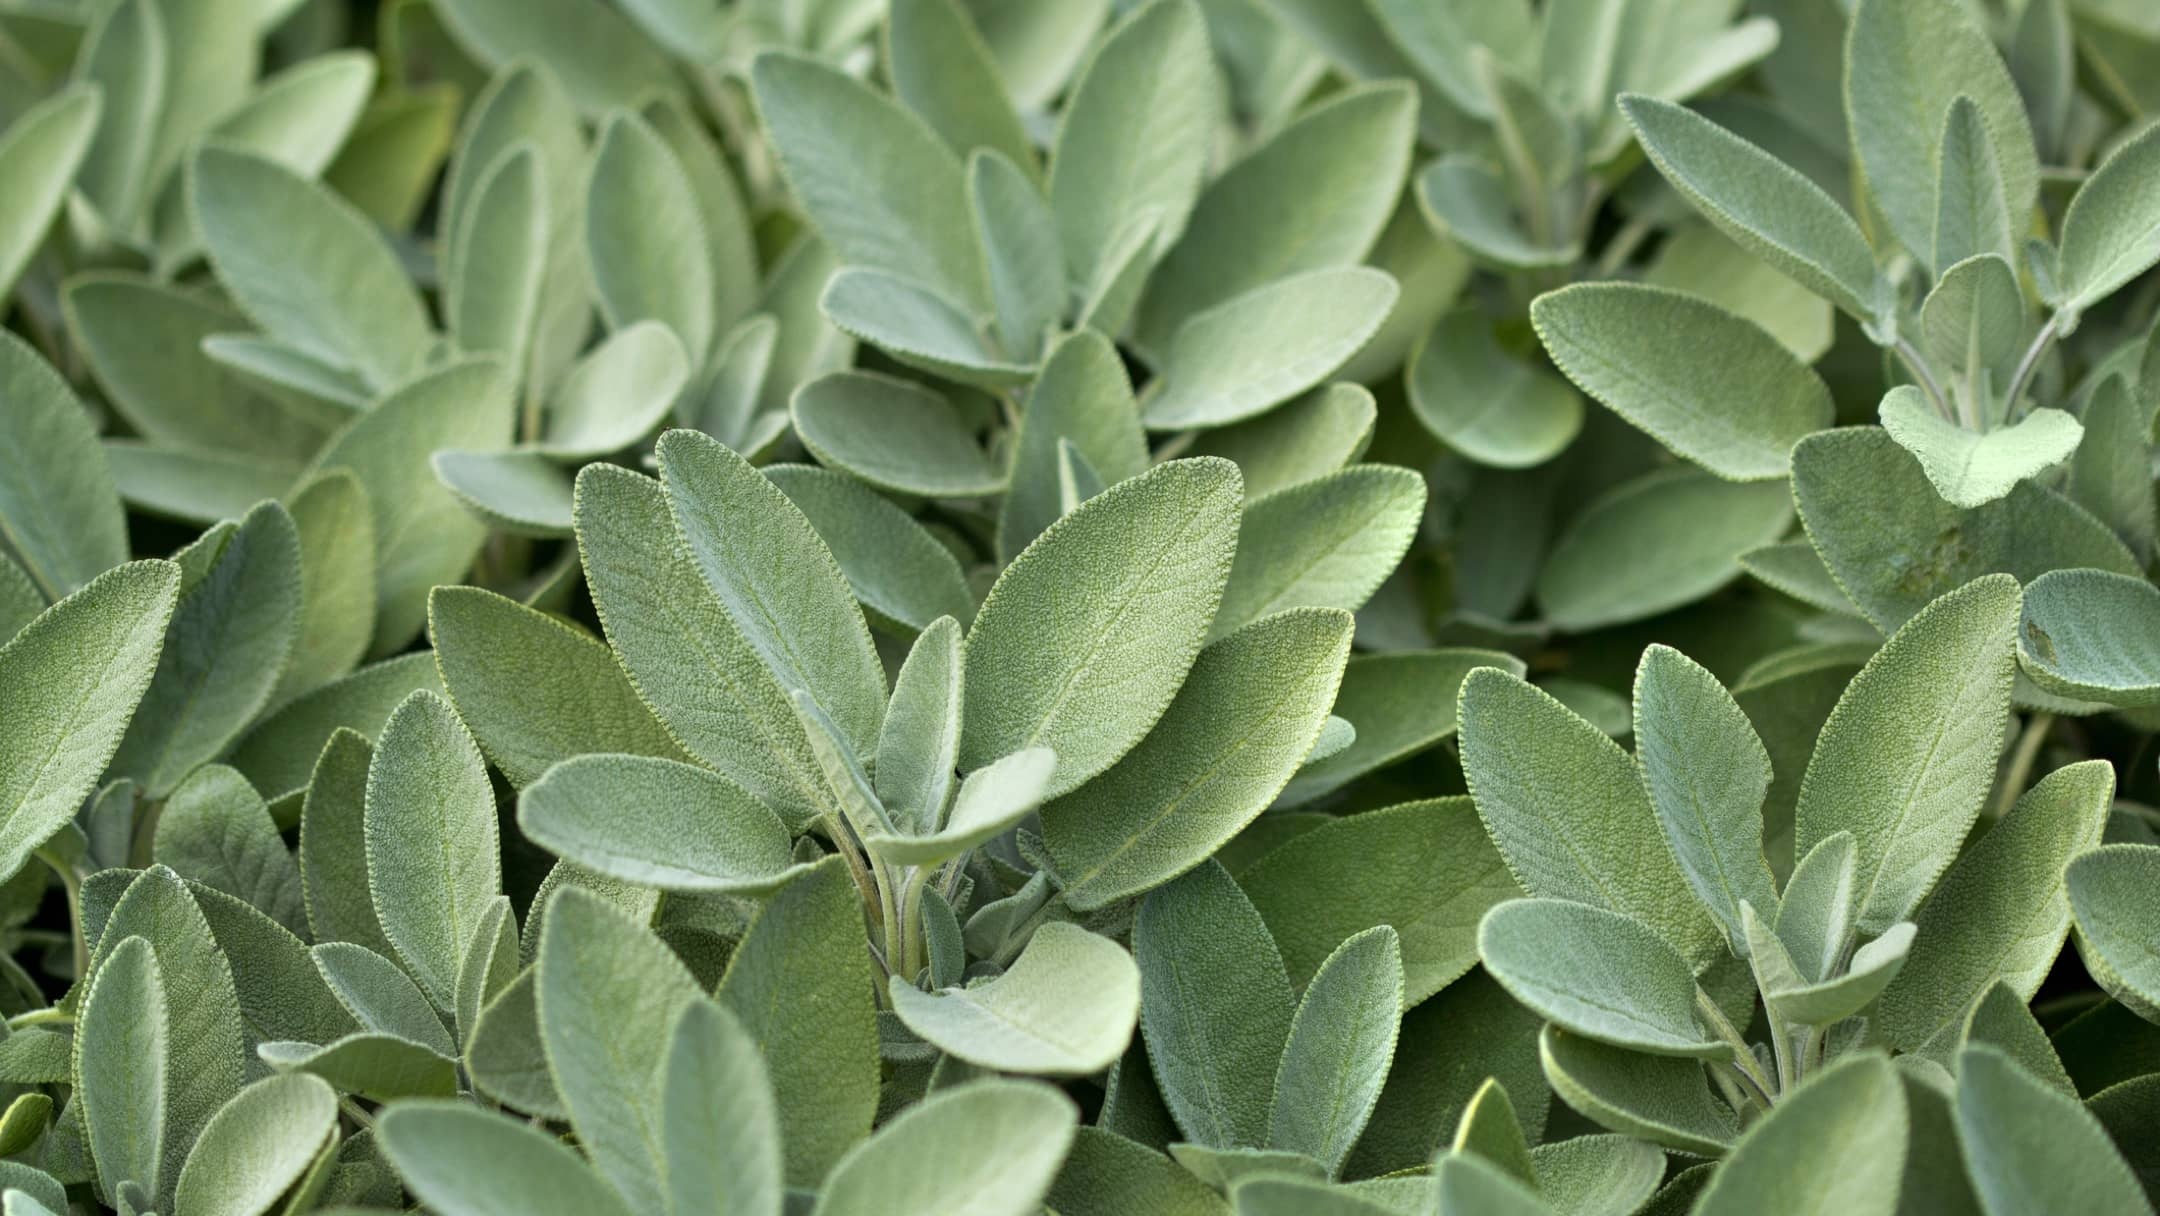 Sage as a spice, Culinary applications, Seasoning plant, Traditional flavoring, 2160x1220 HD Desktop